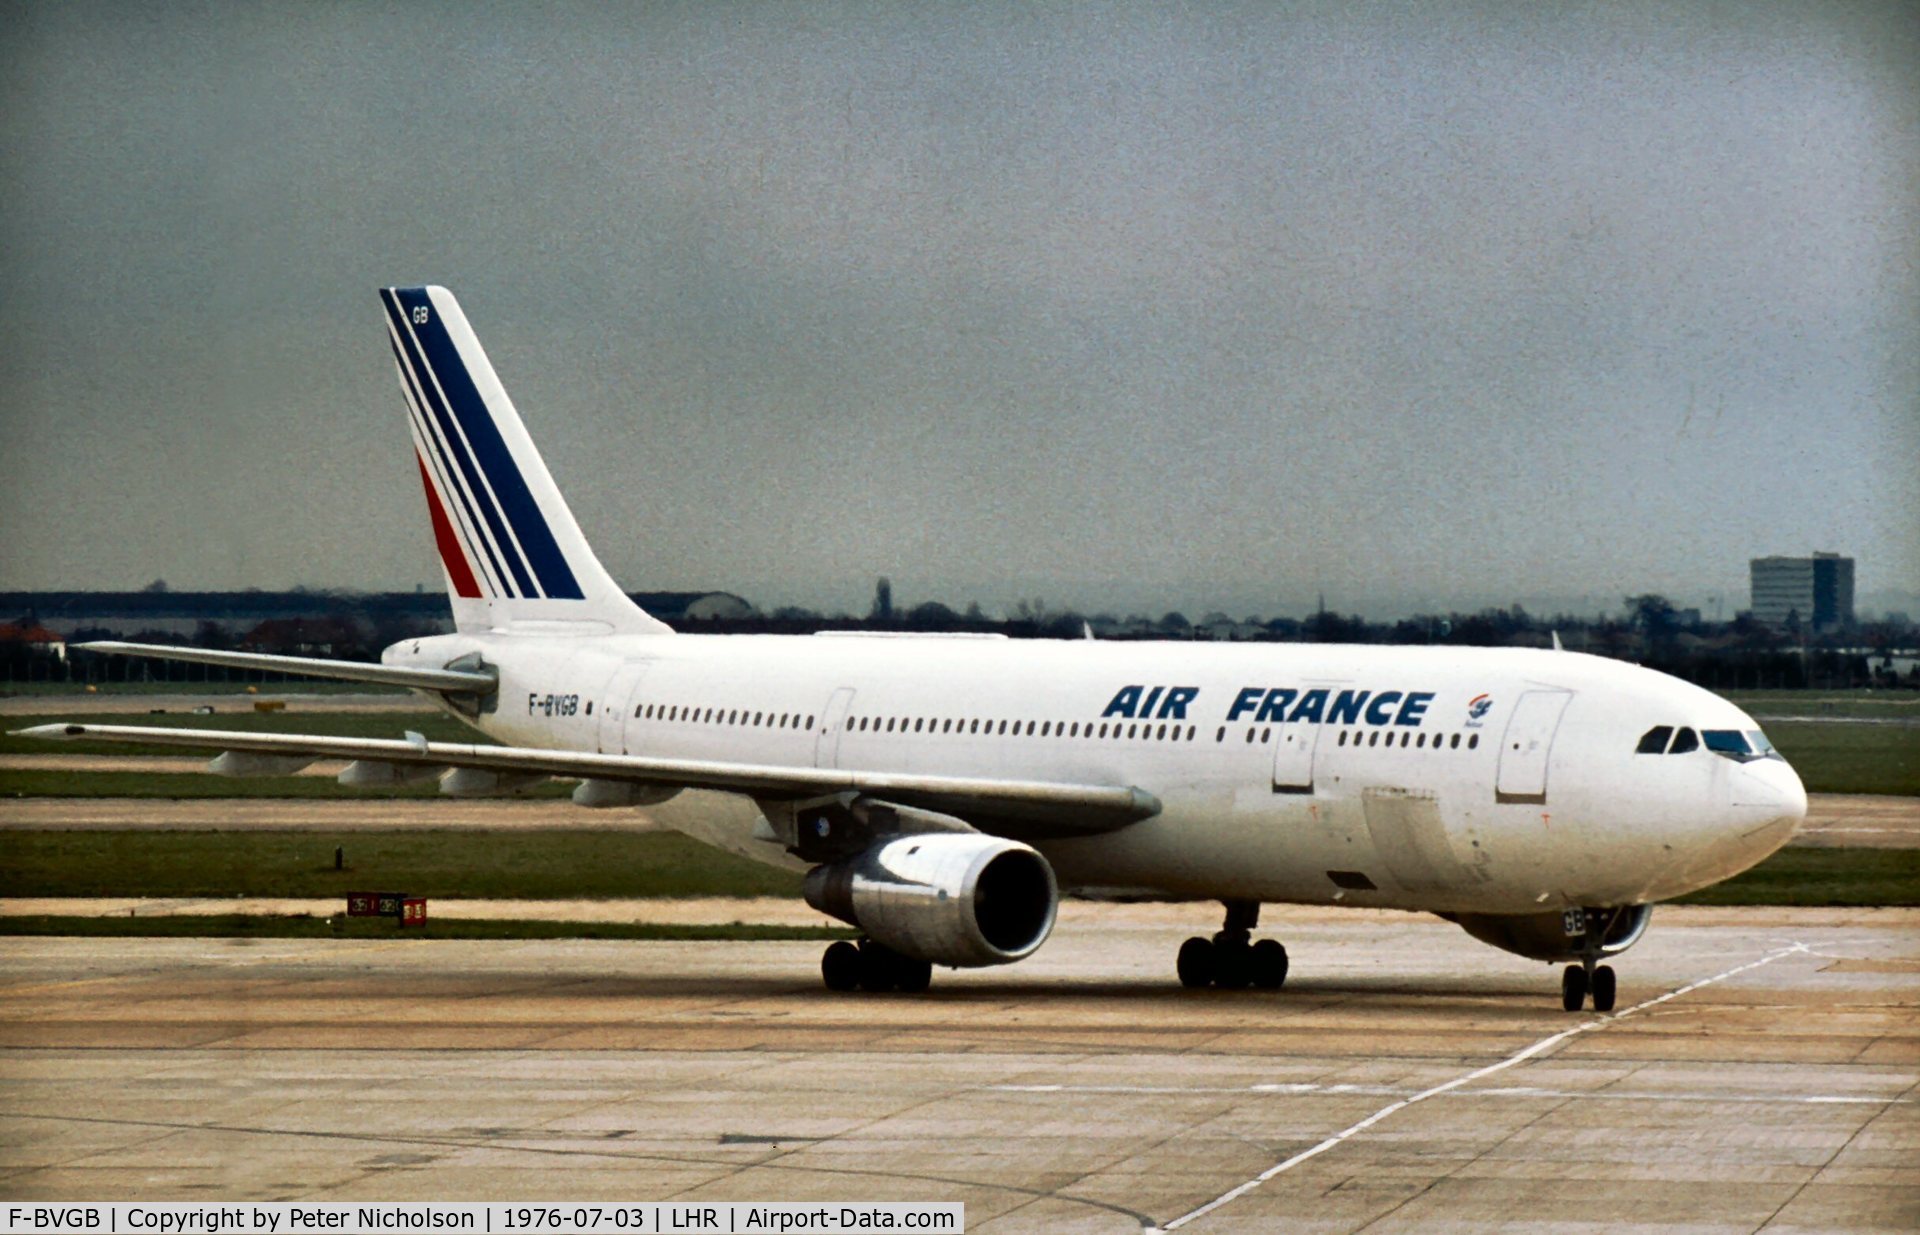 F-BVGB, 1974 Airbus A300B2-1C C/N 6, In service with Air France as seen at London Heathrow in the summer of 1976.